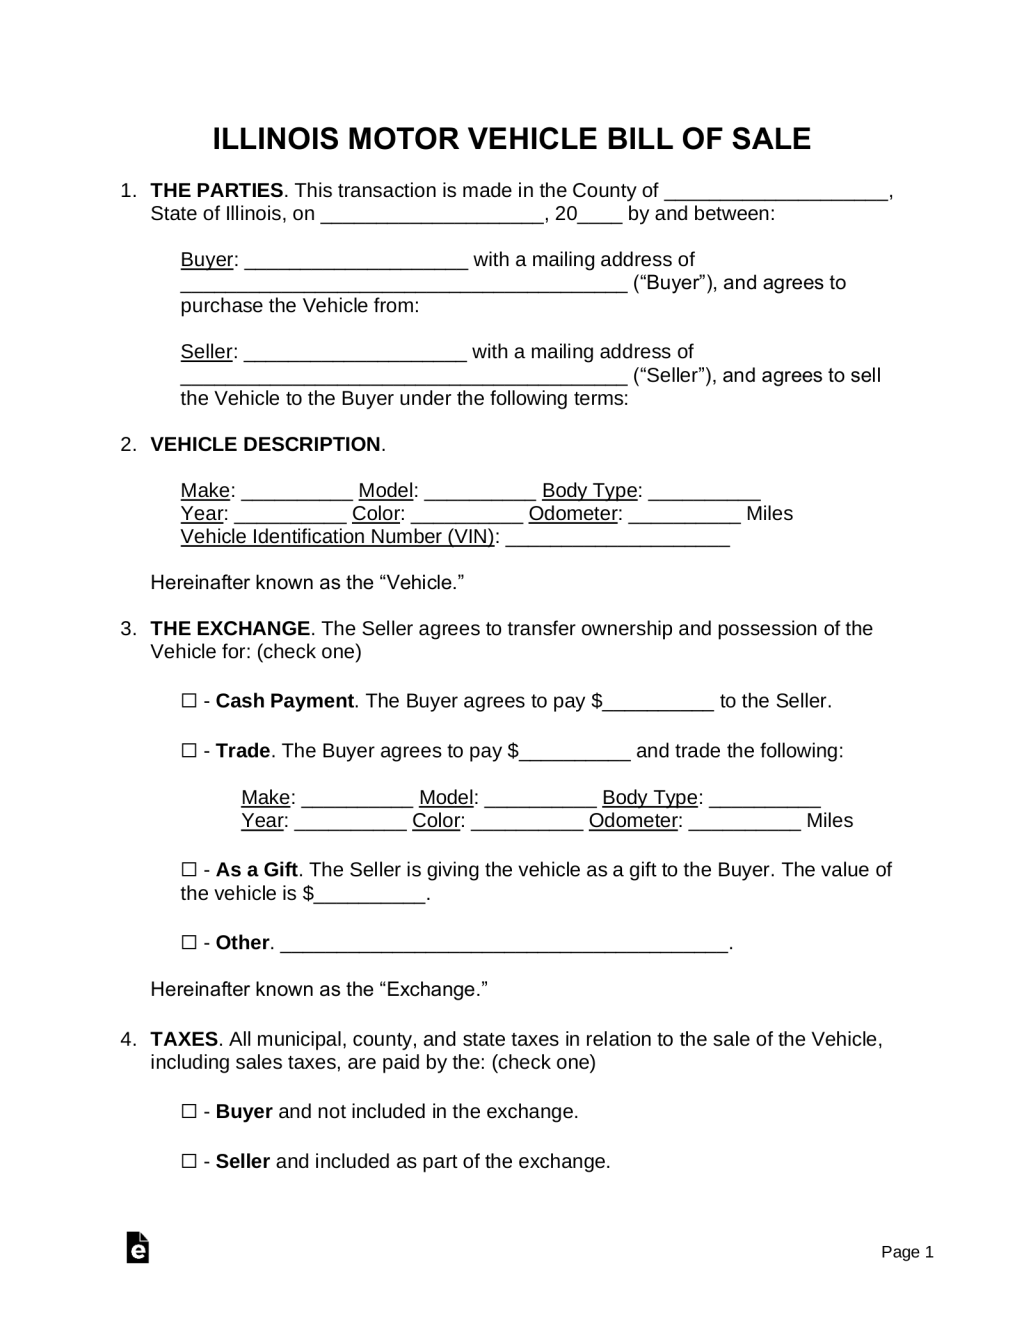 Picture of: Free Illinois Motor Vehicle Bill of Sale Form – PDF  Word – eForms